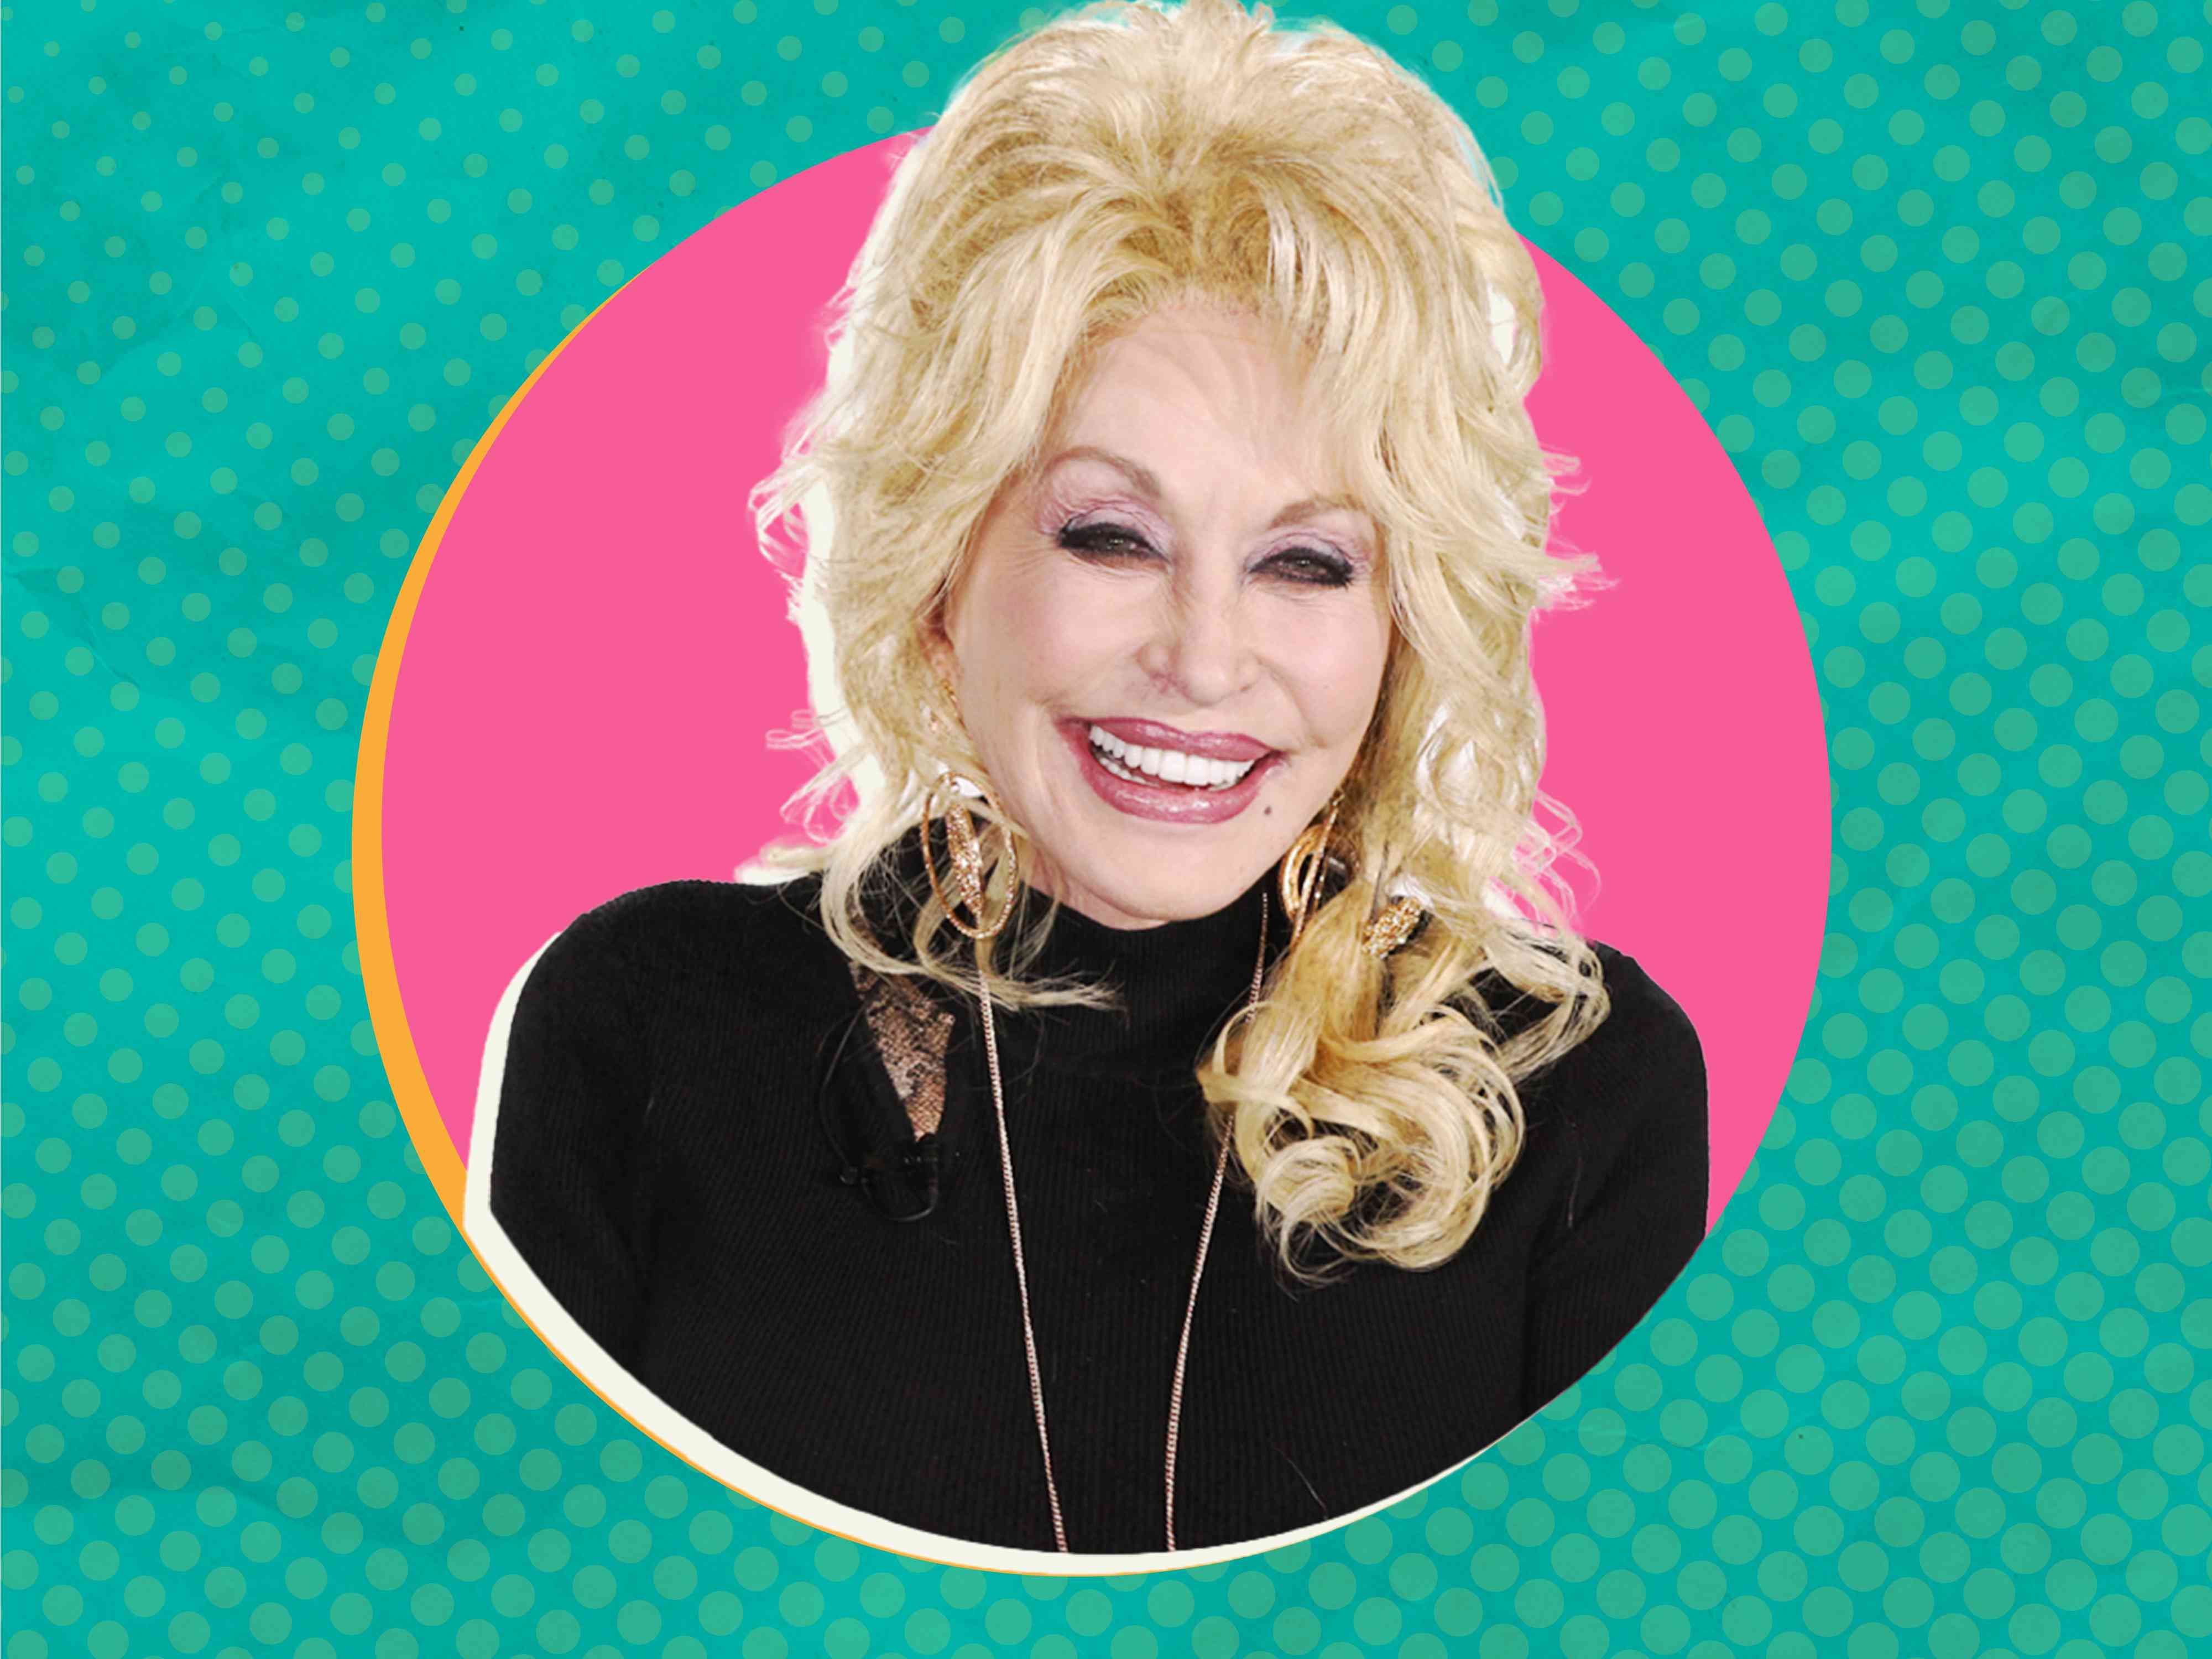 Dolly Parton Just Launched a New Grocery Item—And It’s Her Most Comforting One Yet